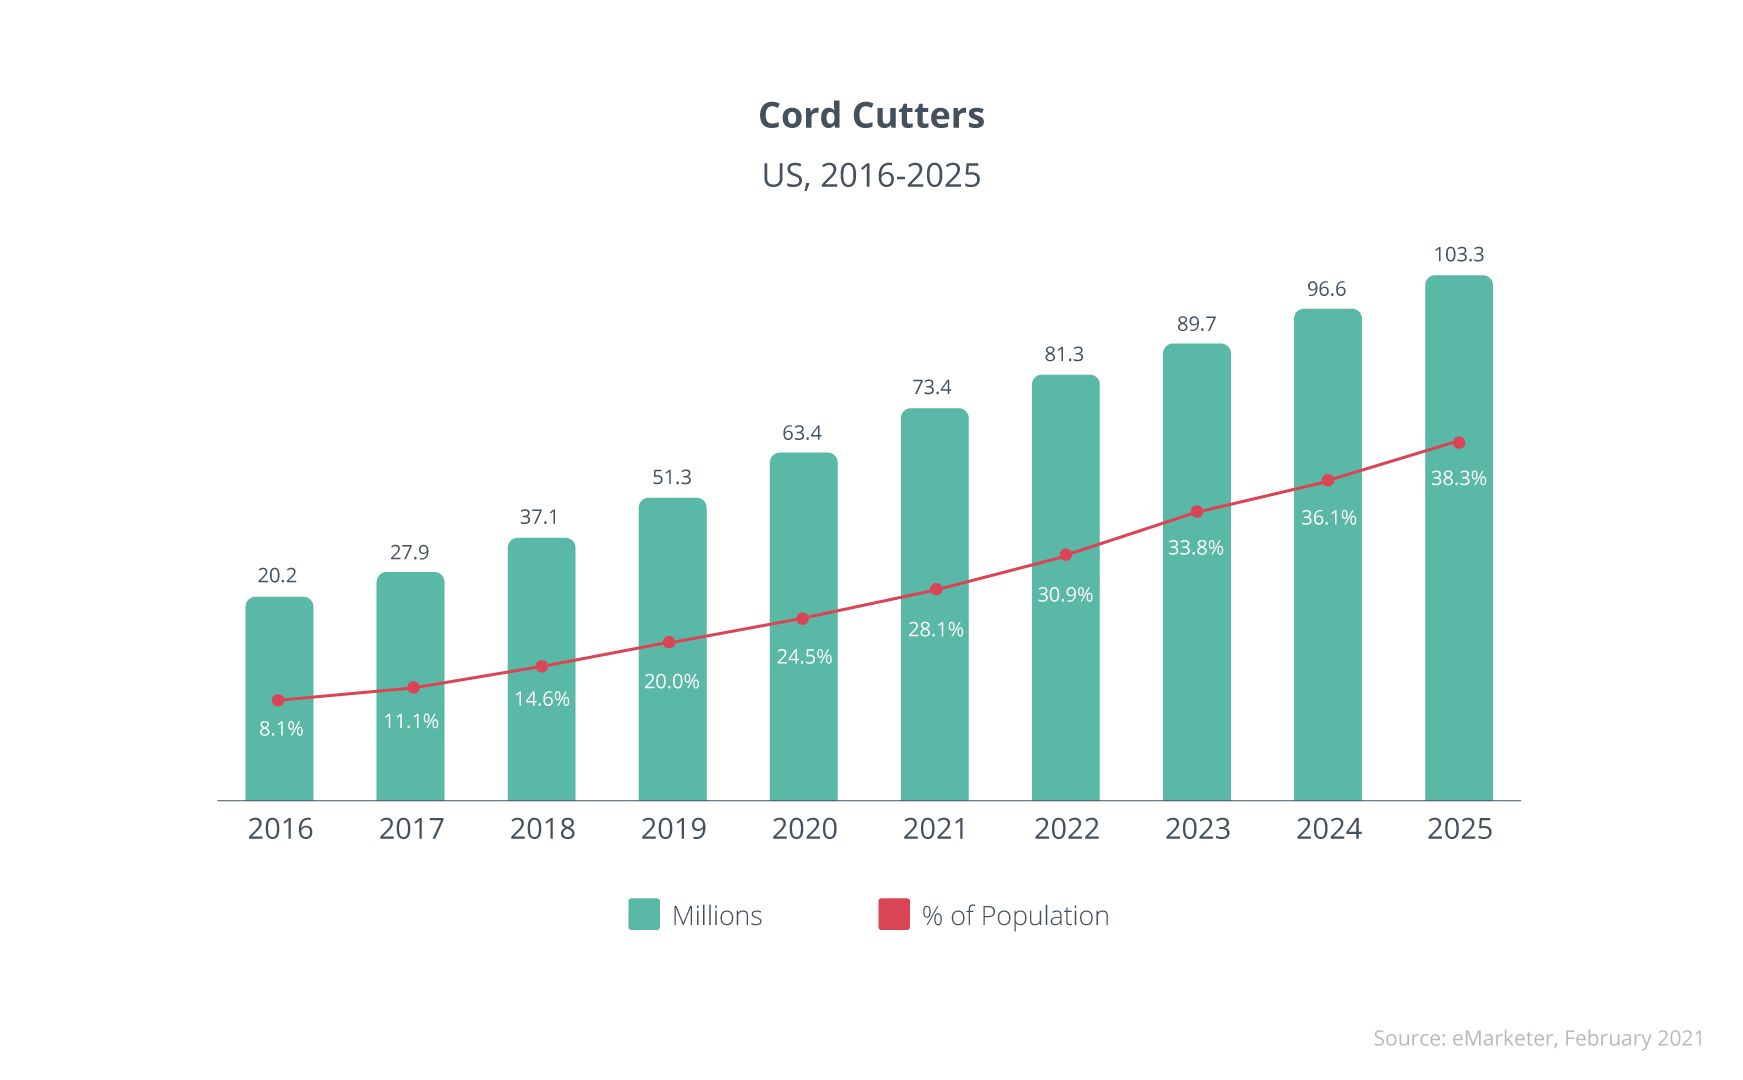 Cord Cutters, US, 2016 - 2025